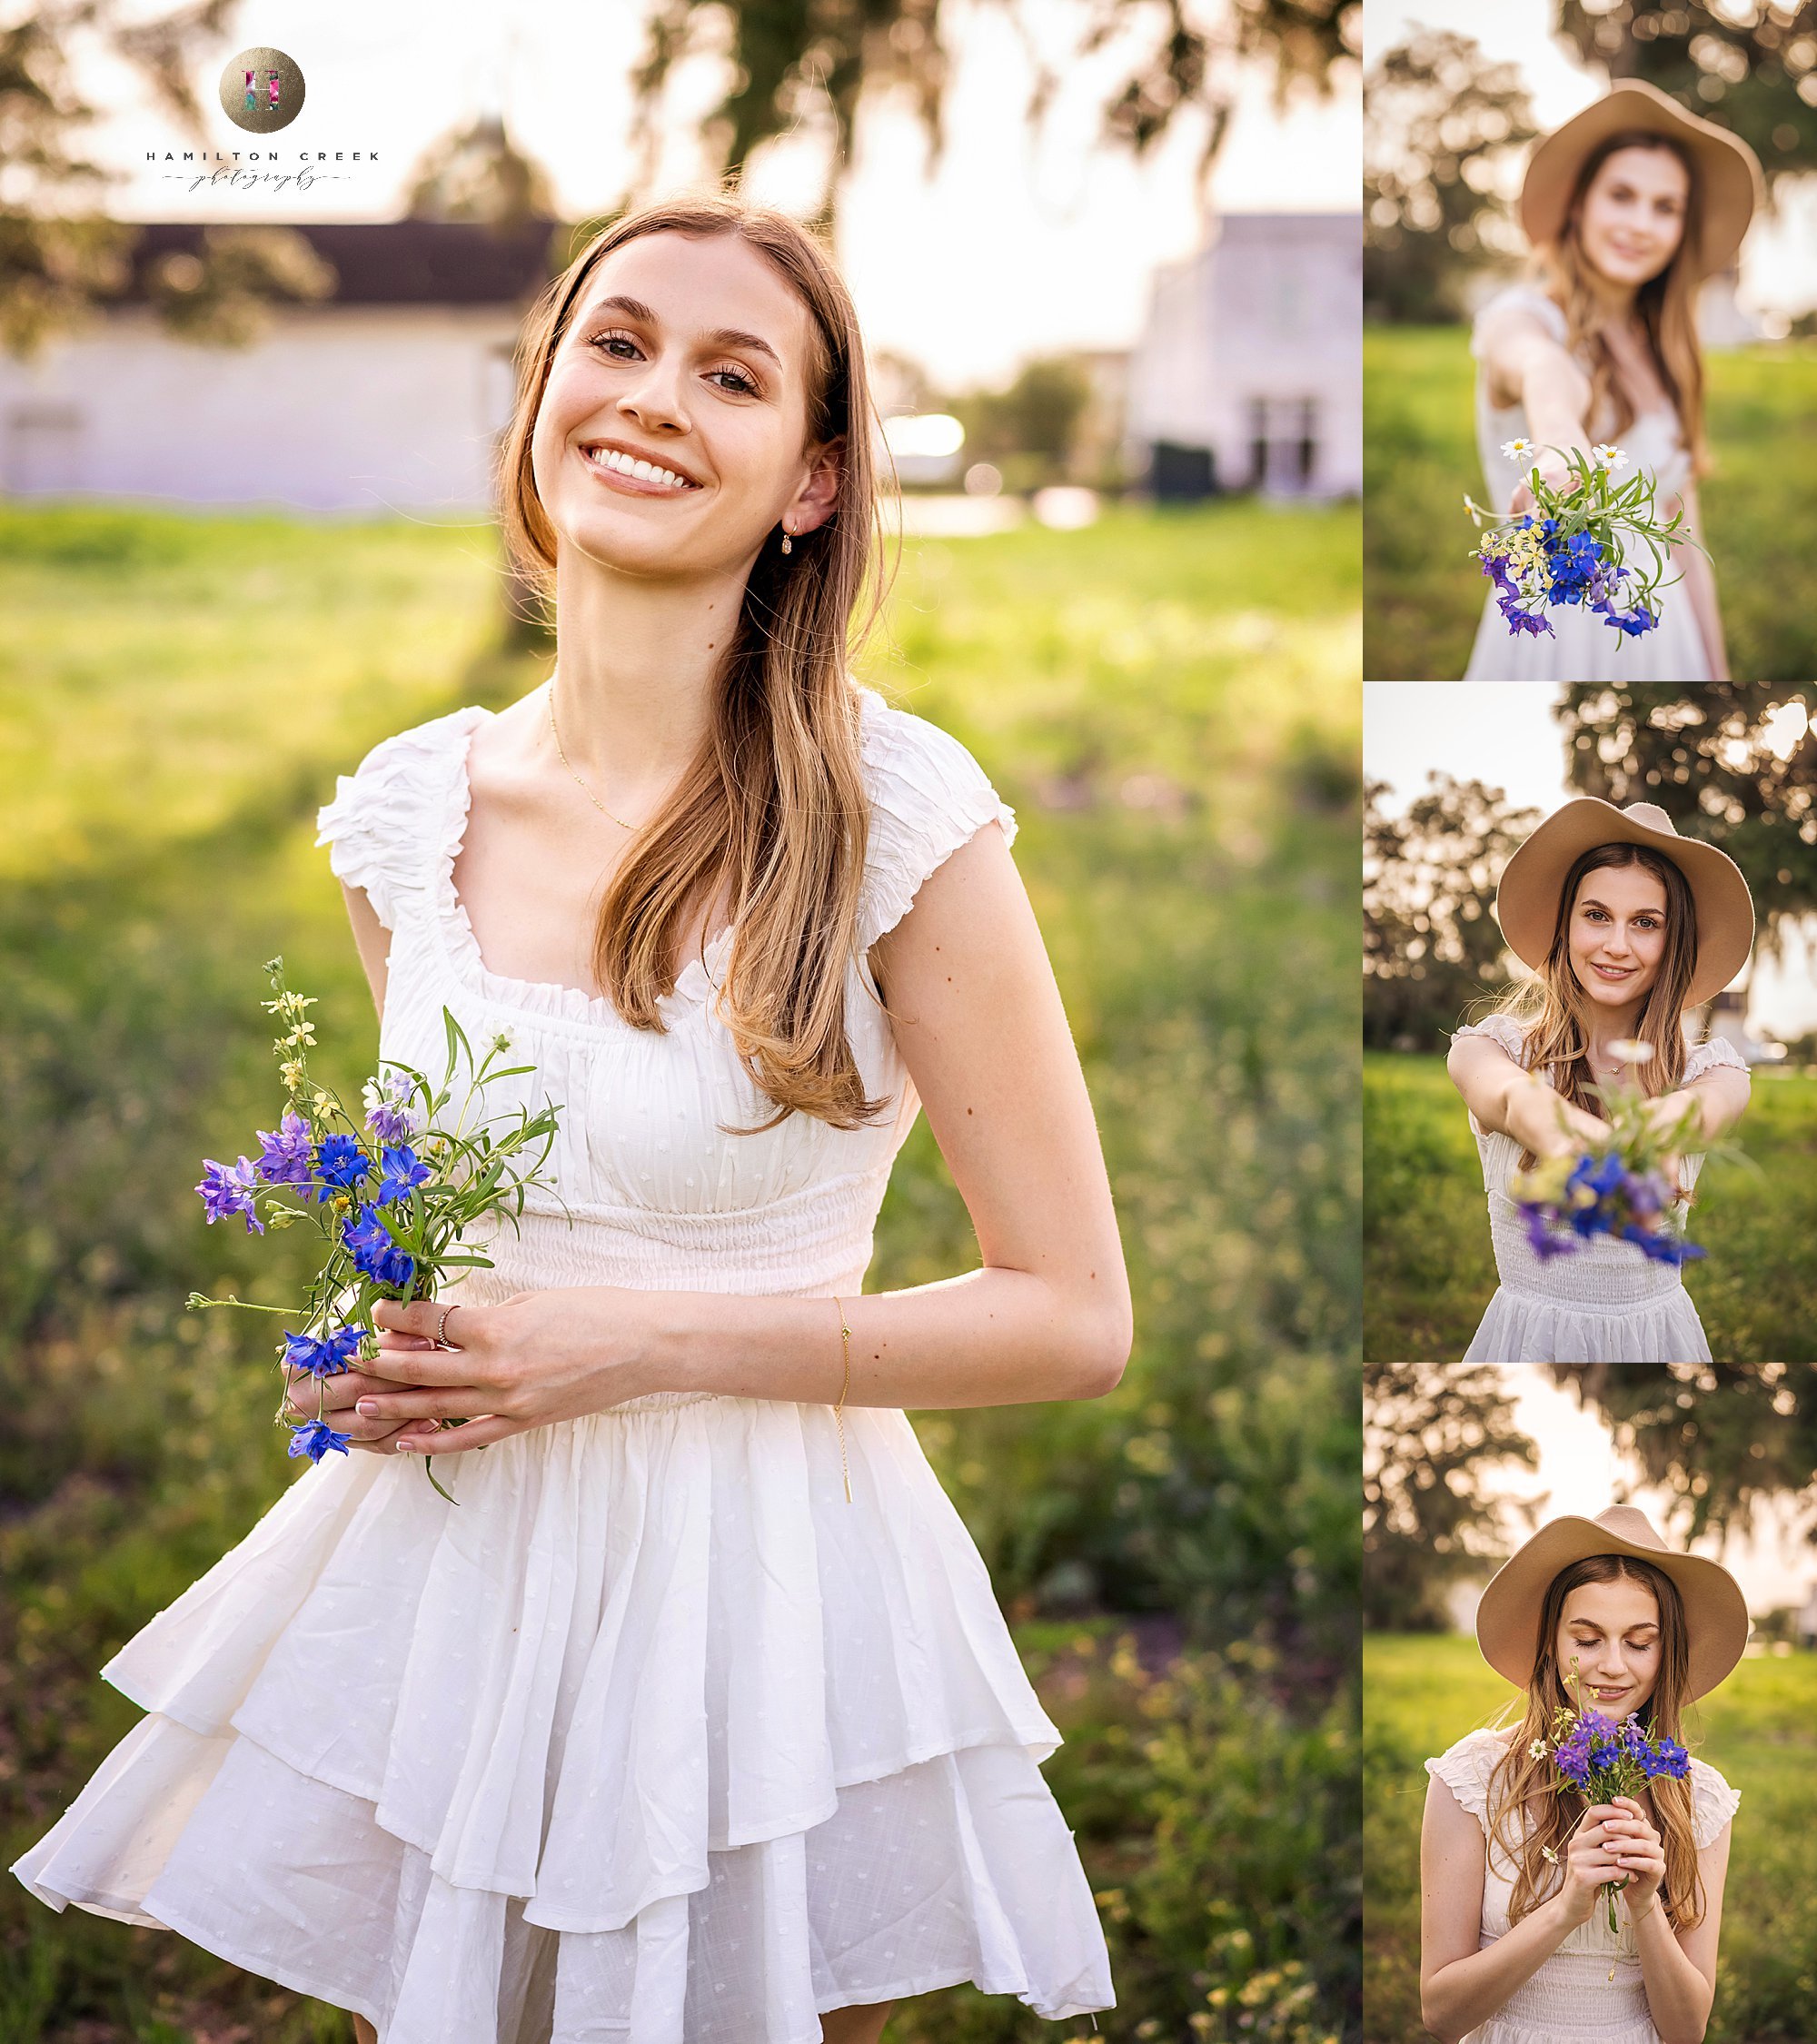 tampa-spring-mini-sessions-riverview-photographer-flower-field-pictures-01.jpg